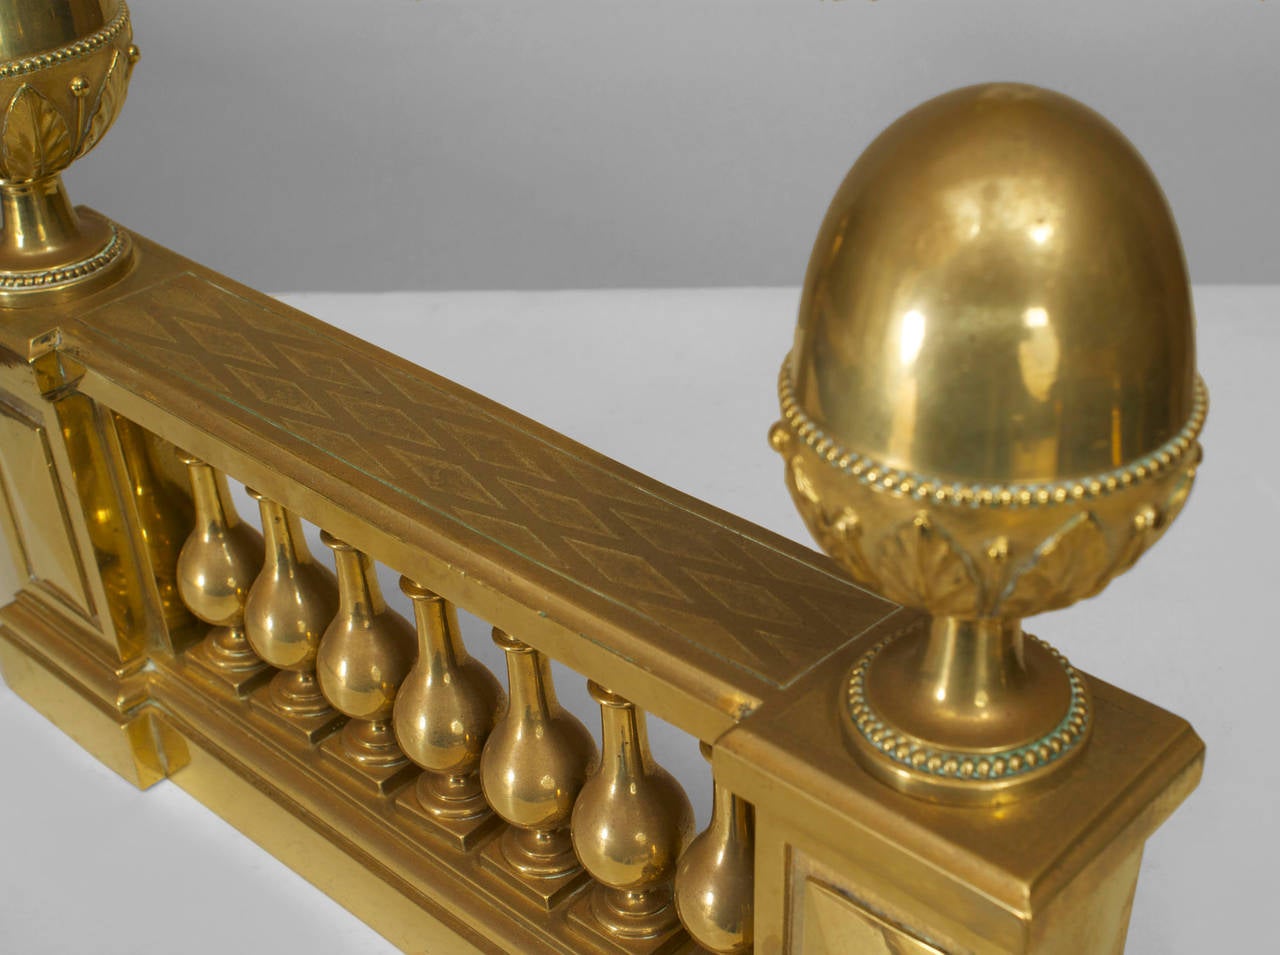 Pair of English Adam-style (19/20th Century) brass balustrade design andirons with large finial sides. (PRICED AS Pair)
